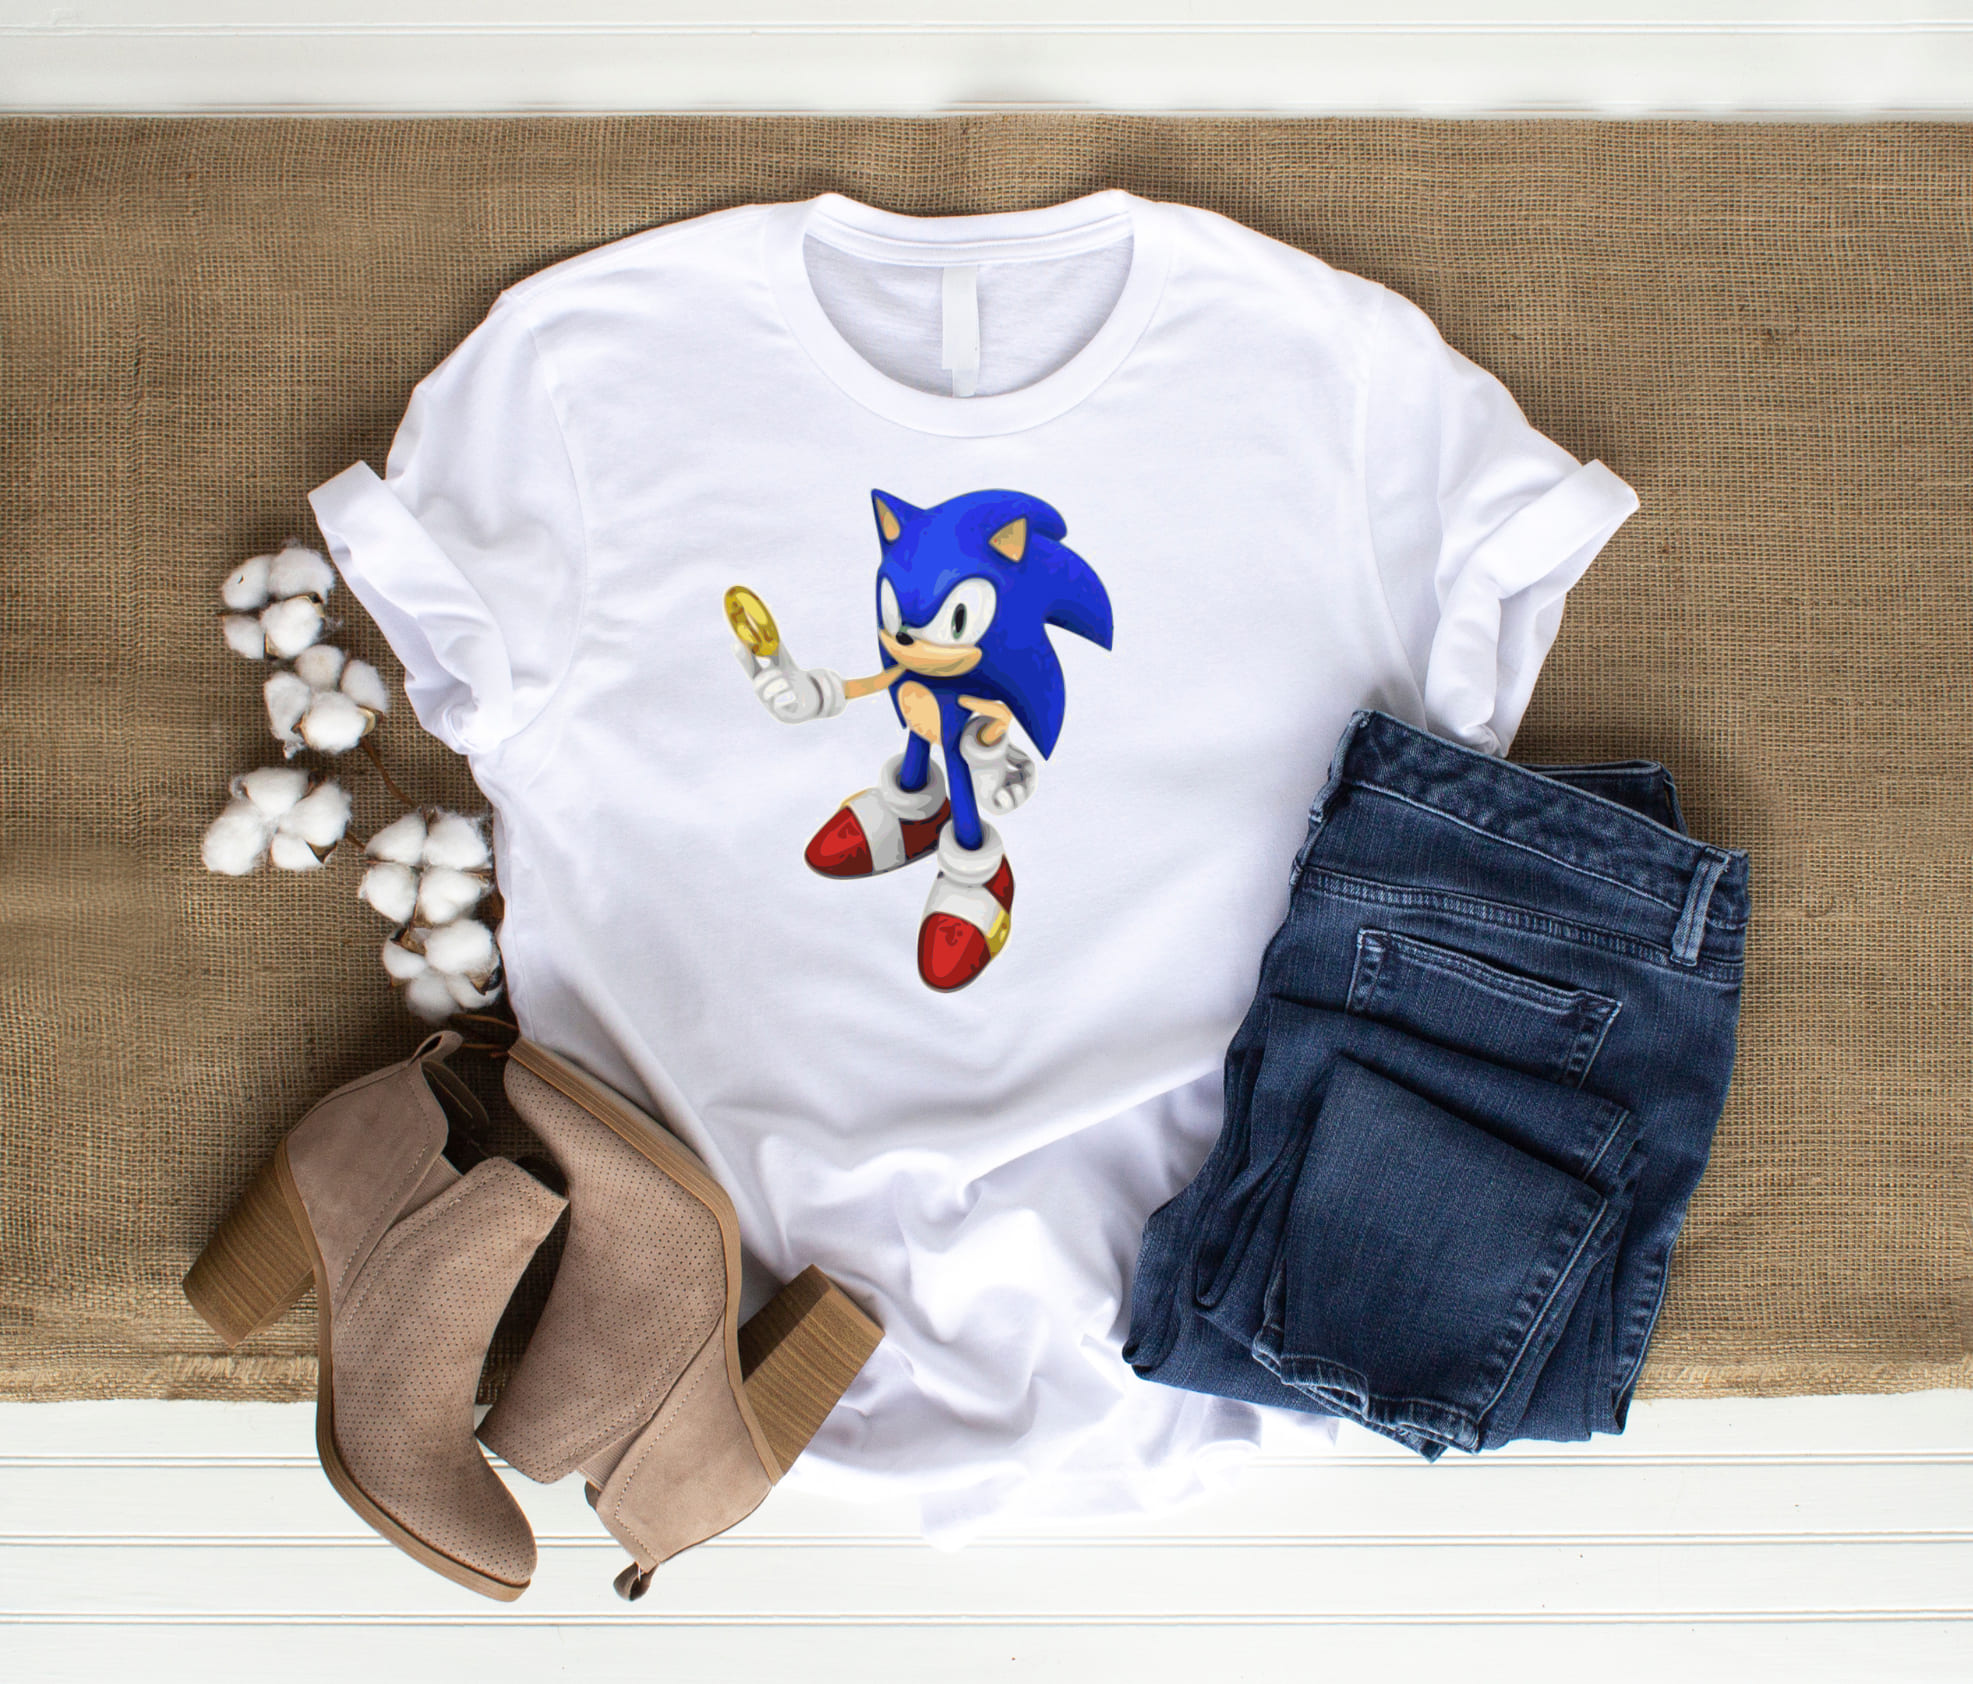 White t-shirt with the Sonic birthday party.